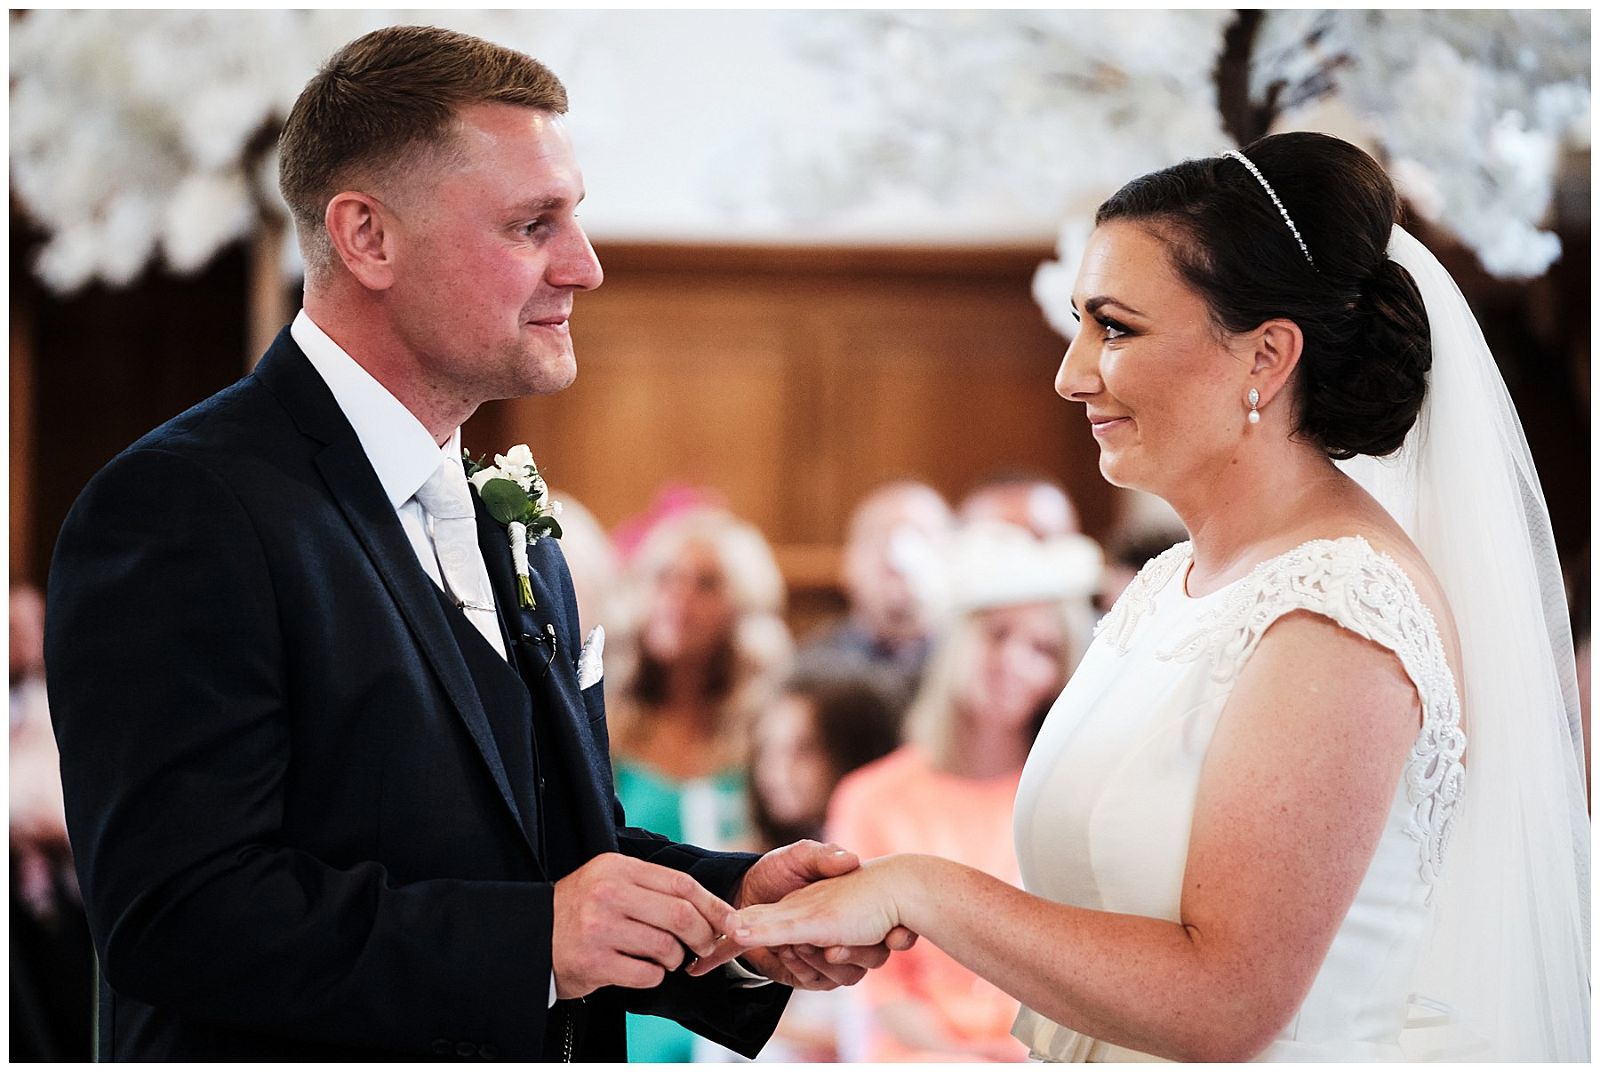 Capturing the exchange of rings at Hawkstone Hall in Shrewsbury by Documentary Wedding Photographer Stuart James